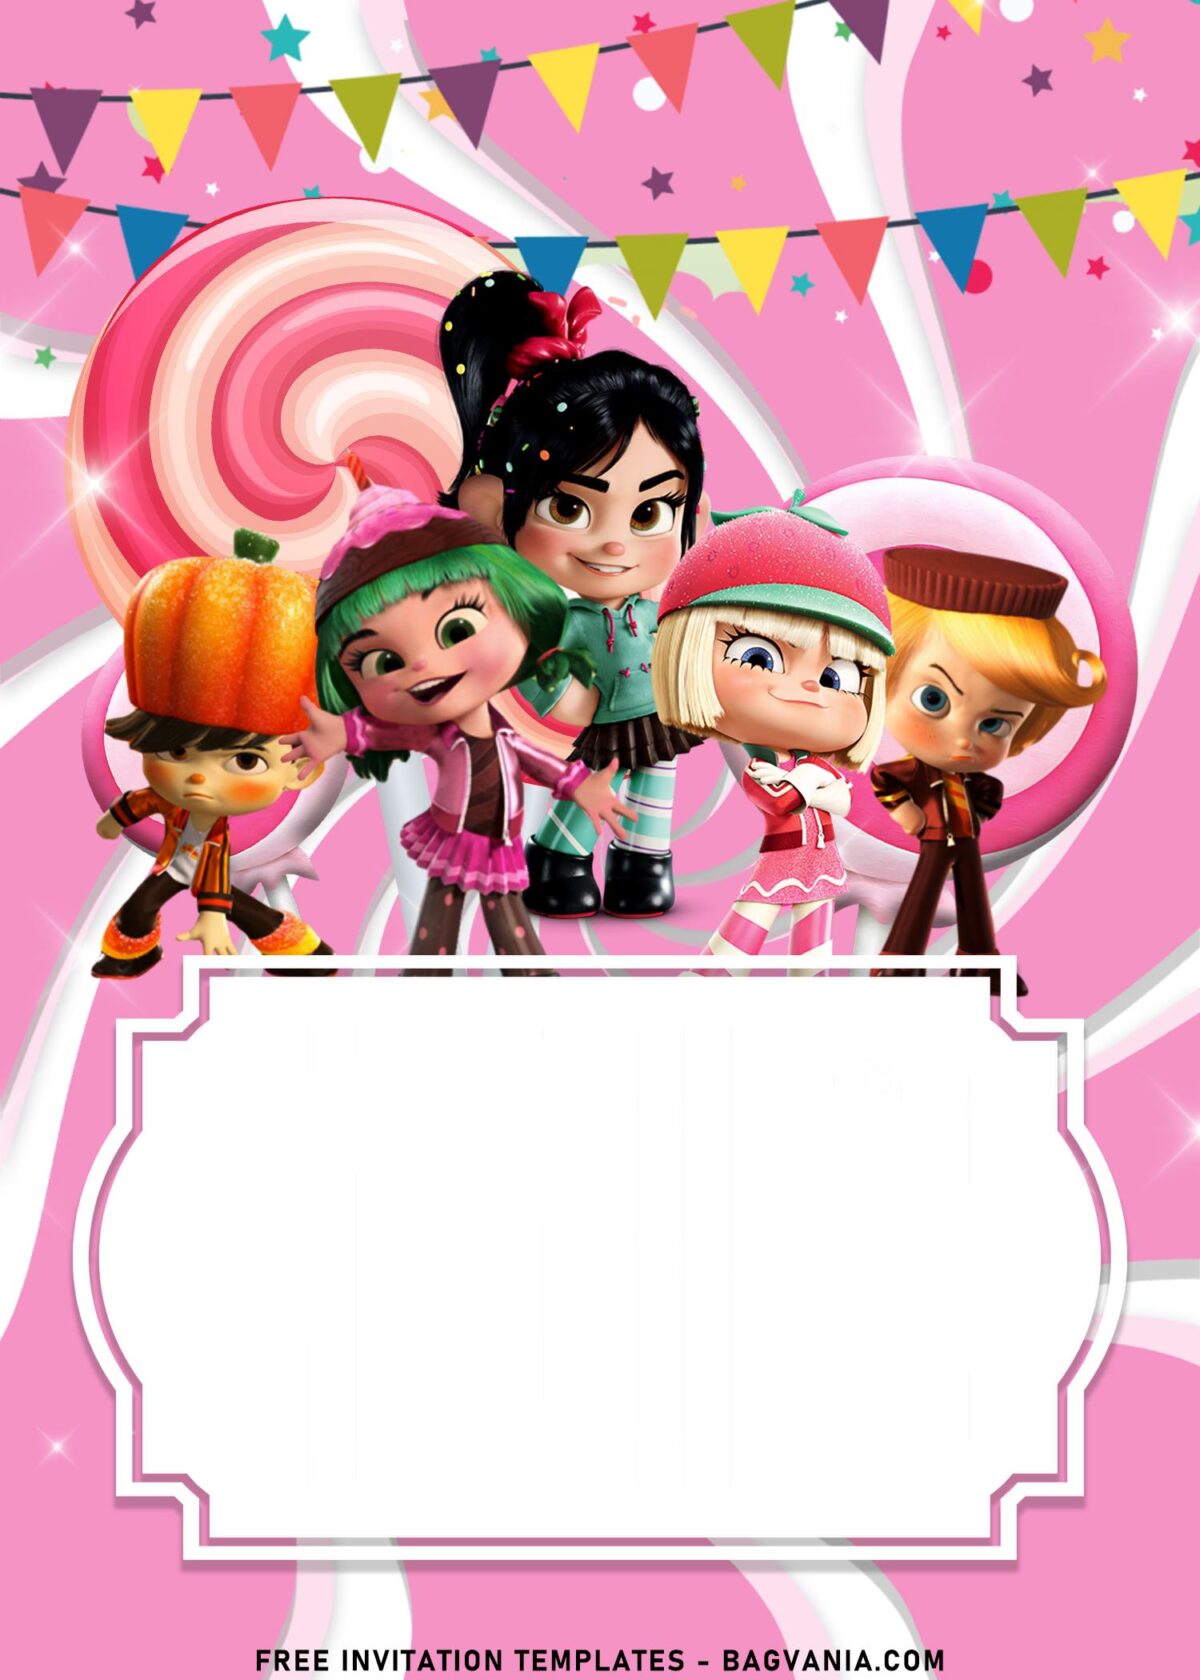 9+ Girly Vanellope Birthday Invitation Templates Great For All Ages with pink swirls